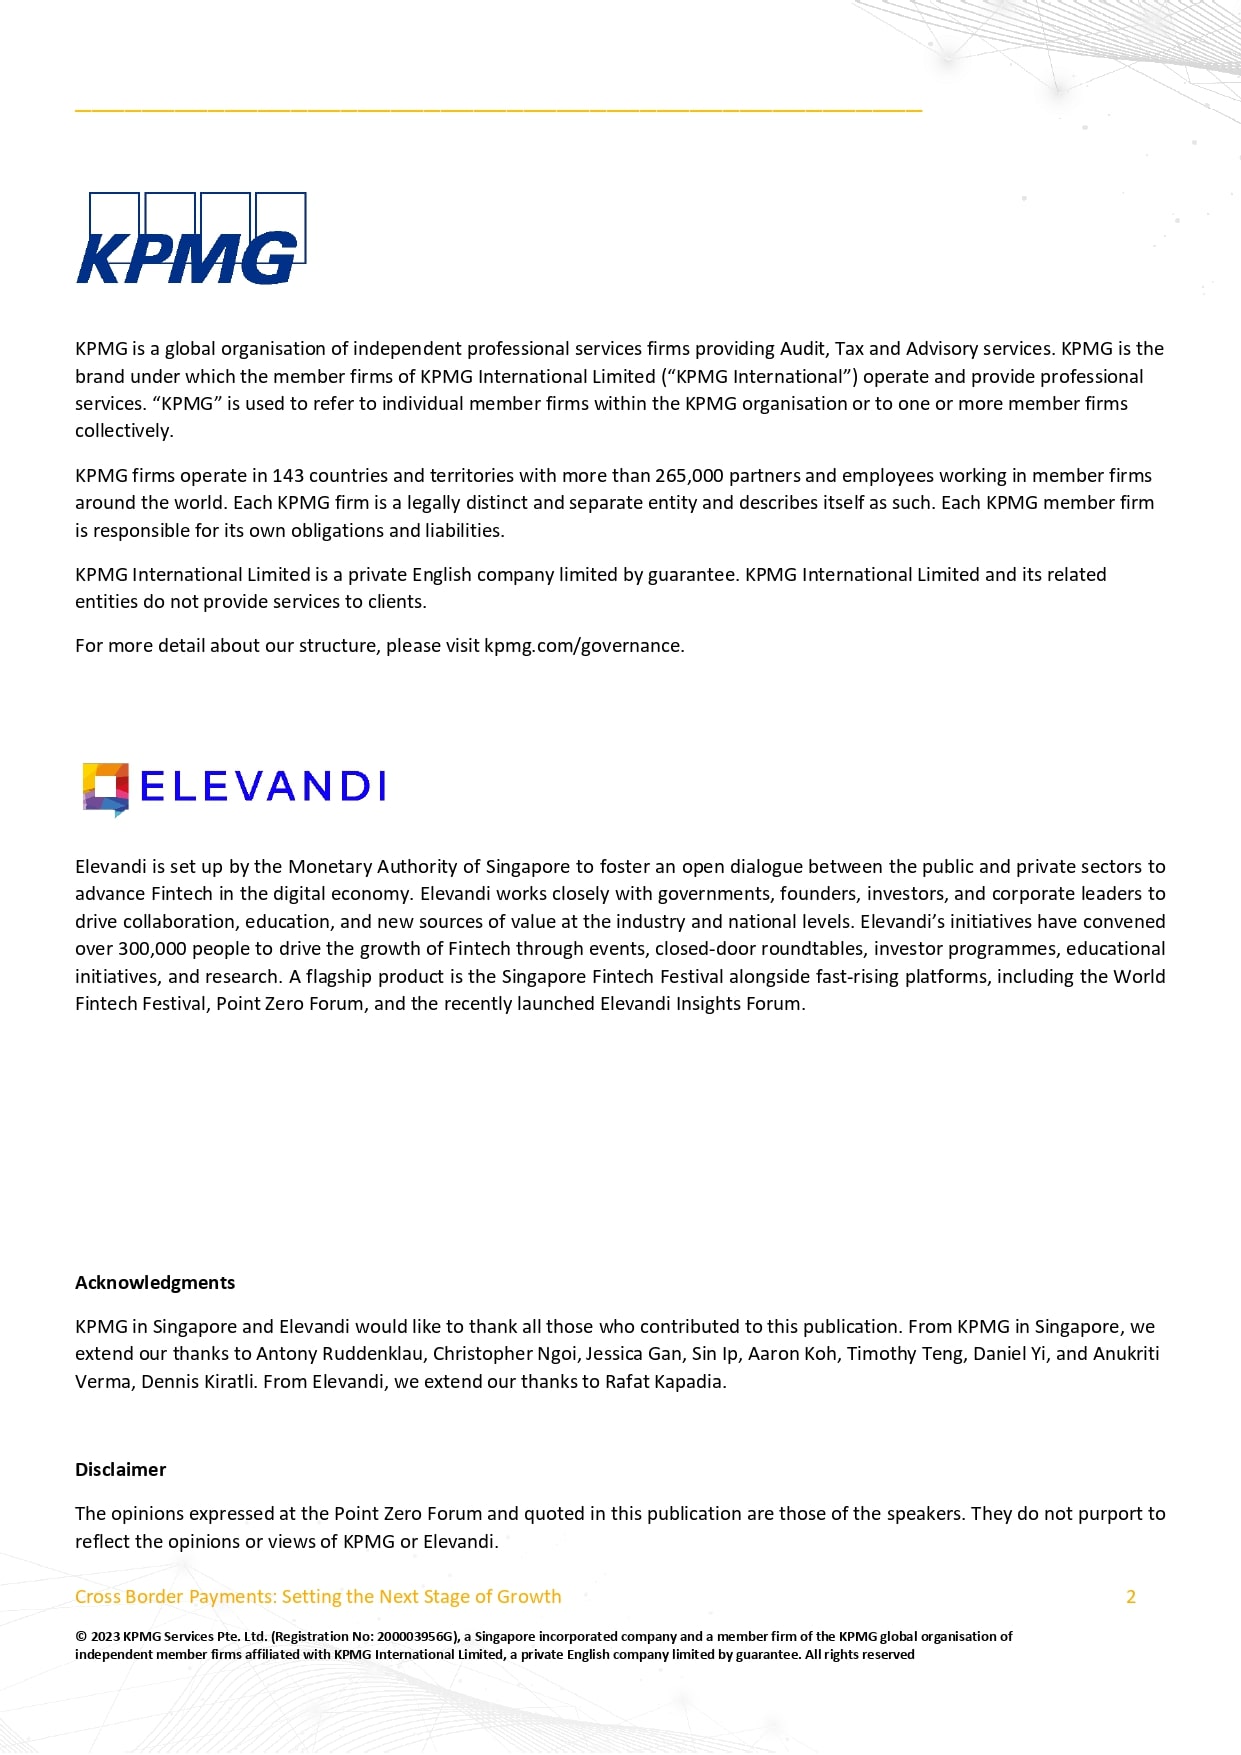 Cross_Border_Payments-Setting_the_Next_Stage_for_Growth_KPMG_PZF2023-pages-2